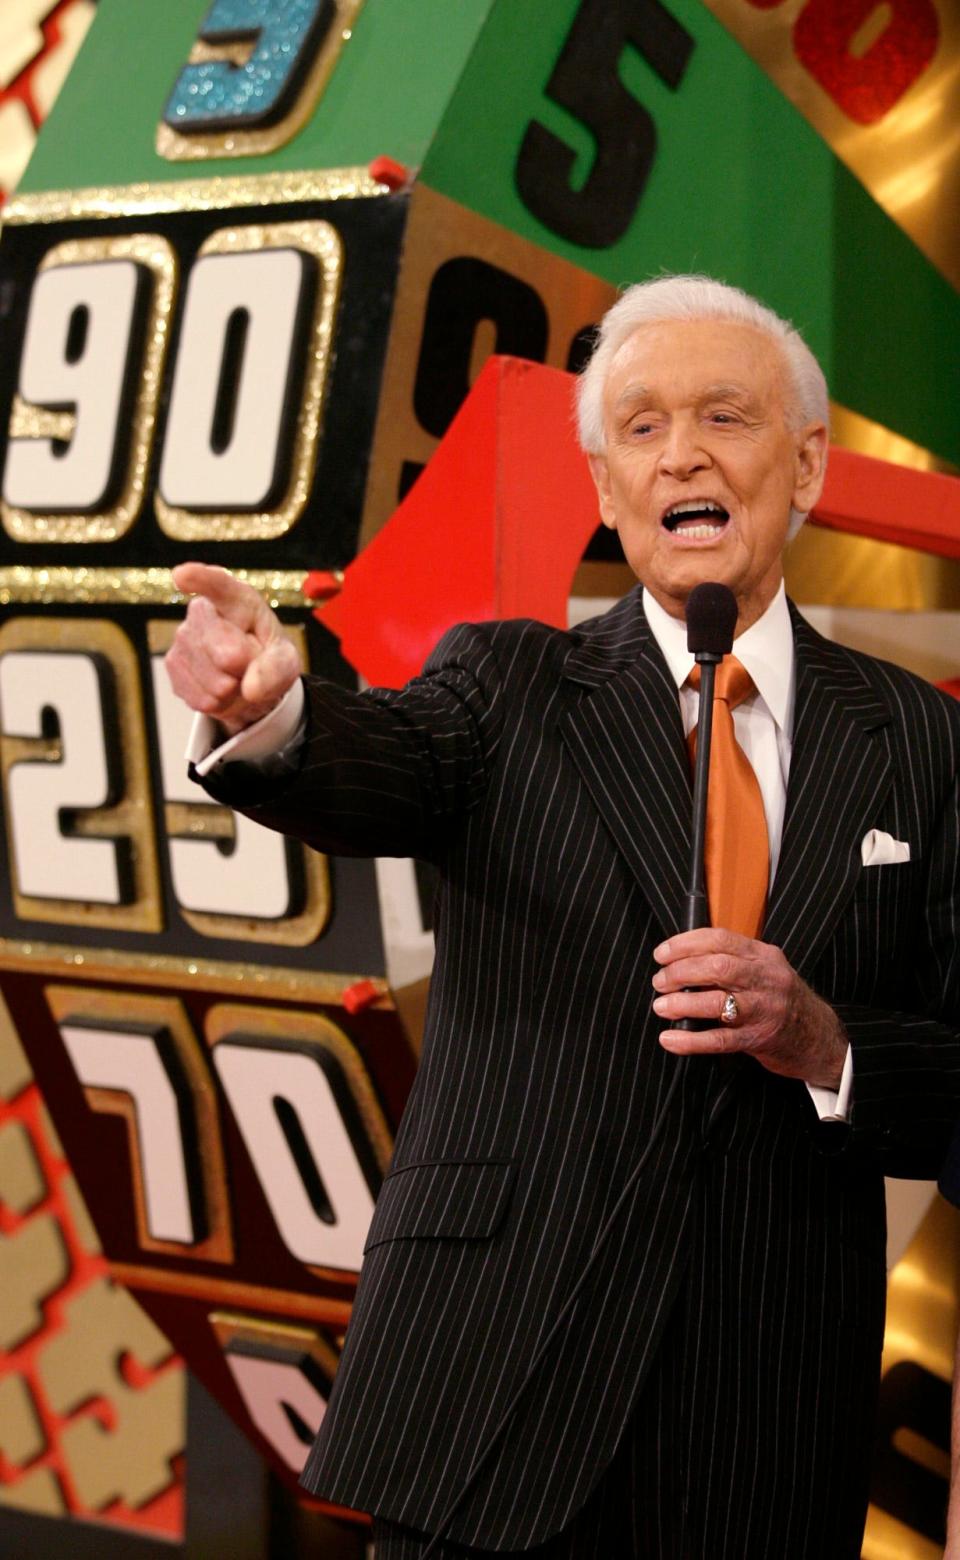 Bob Barker interacts with the audience during a taping of 'The Price Is Right.'